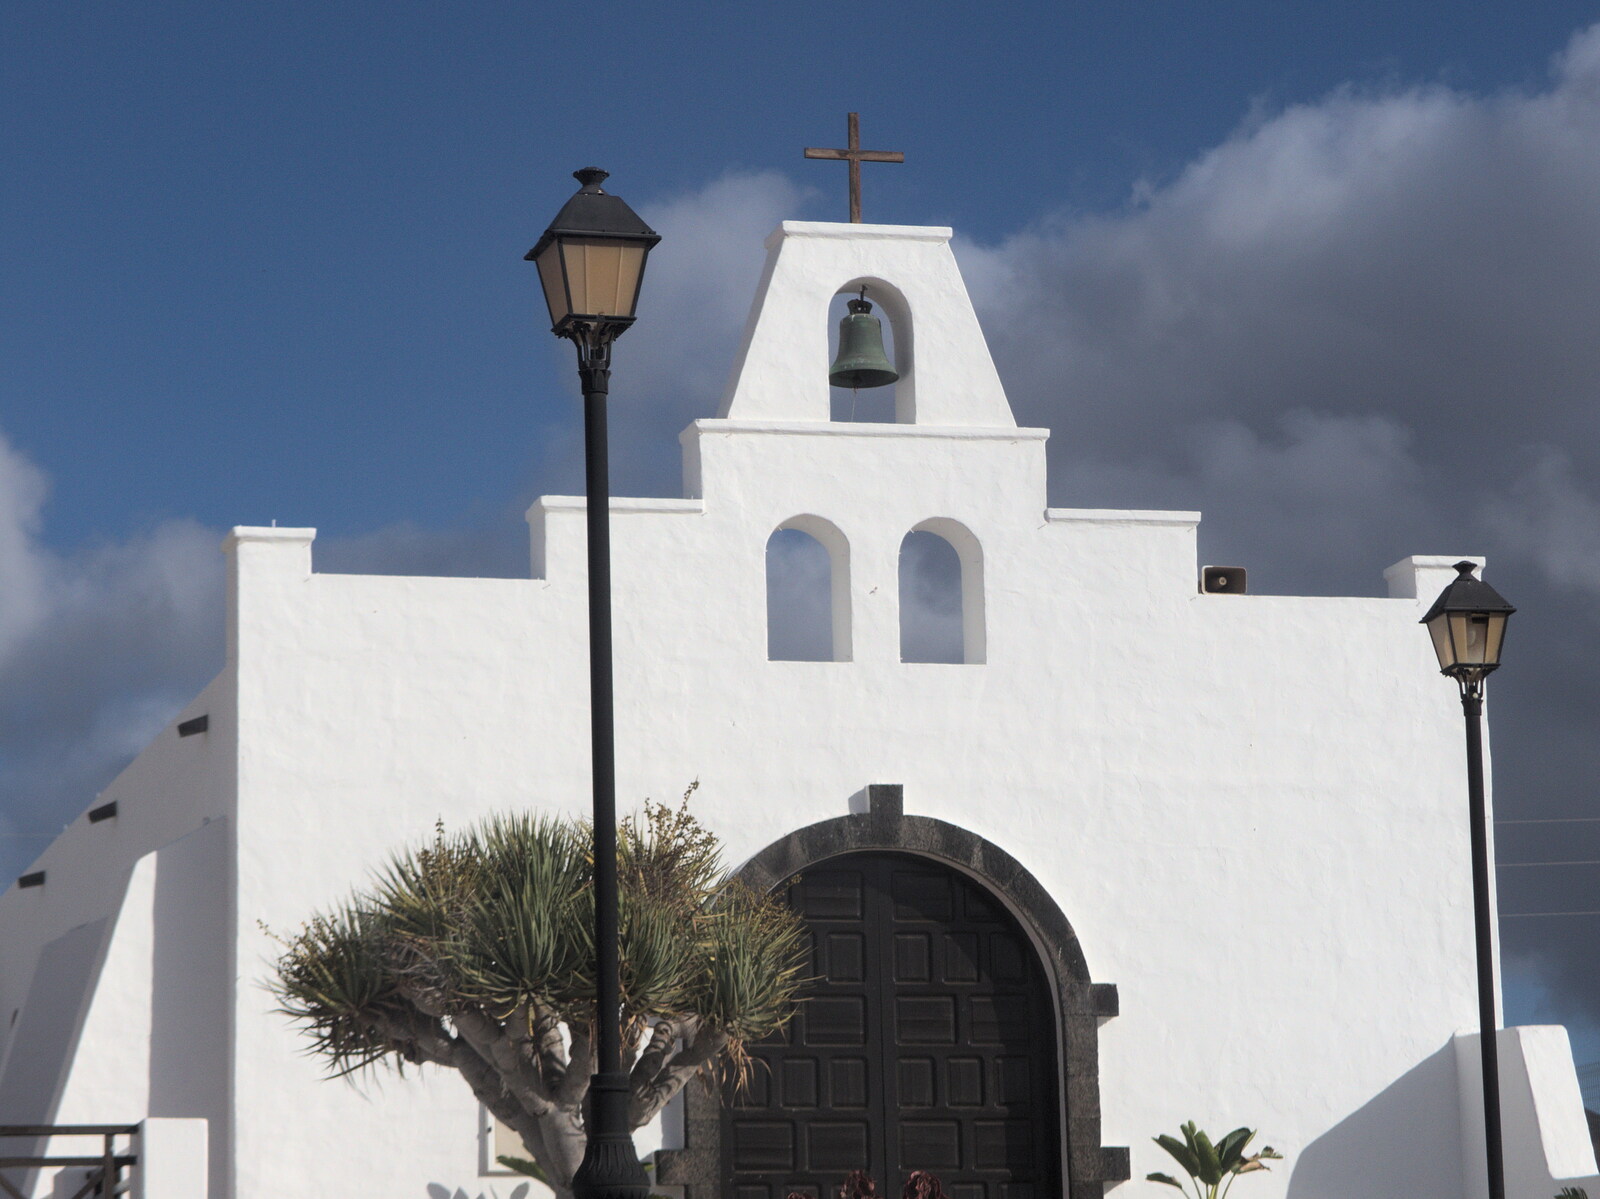 A church and its bell from The Volcanoes of Lanzarote, Canary Islands, Spain - 27th October 2021